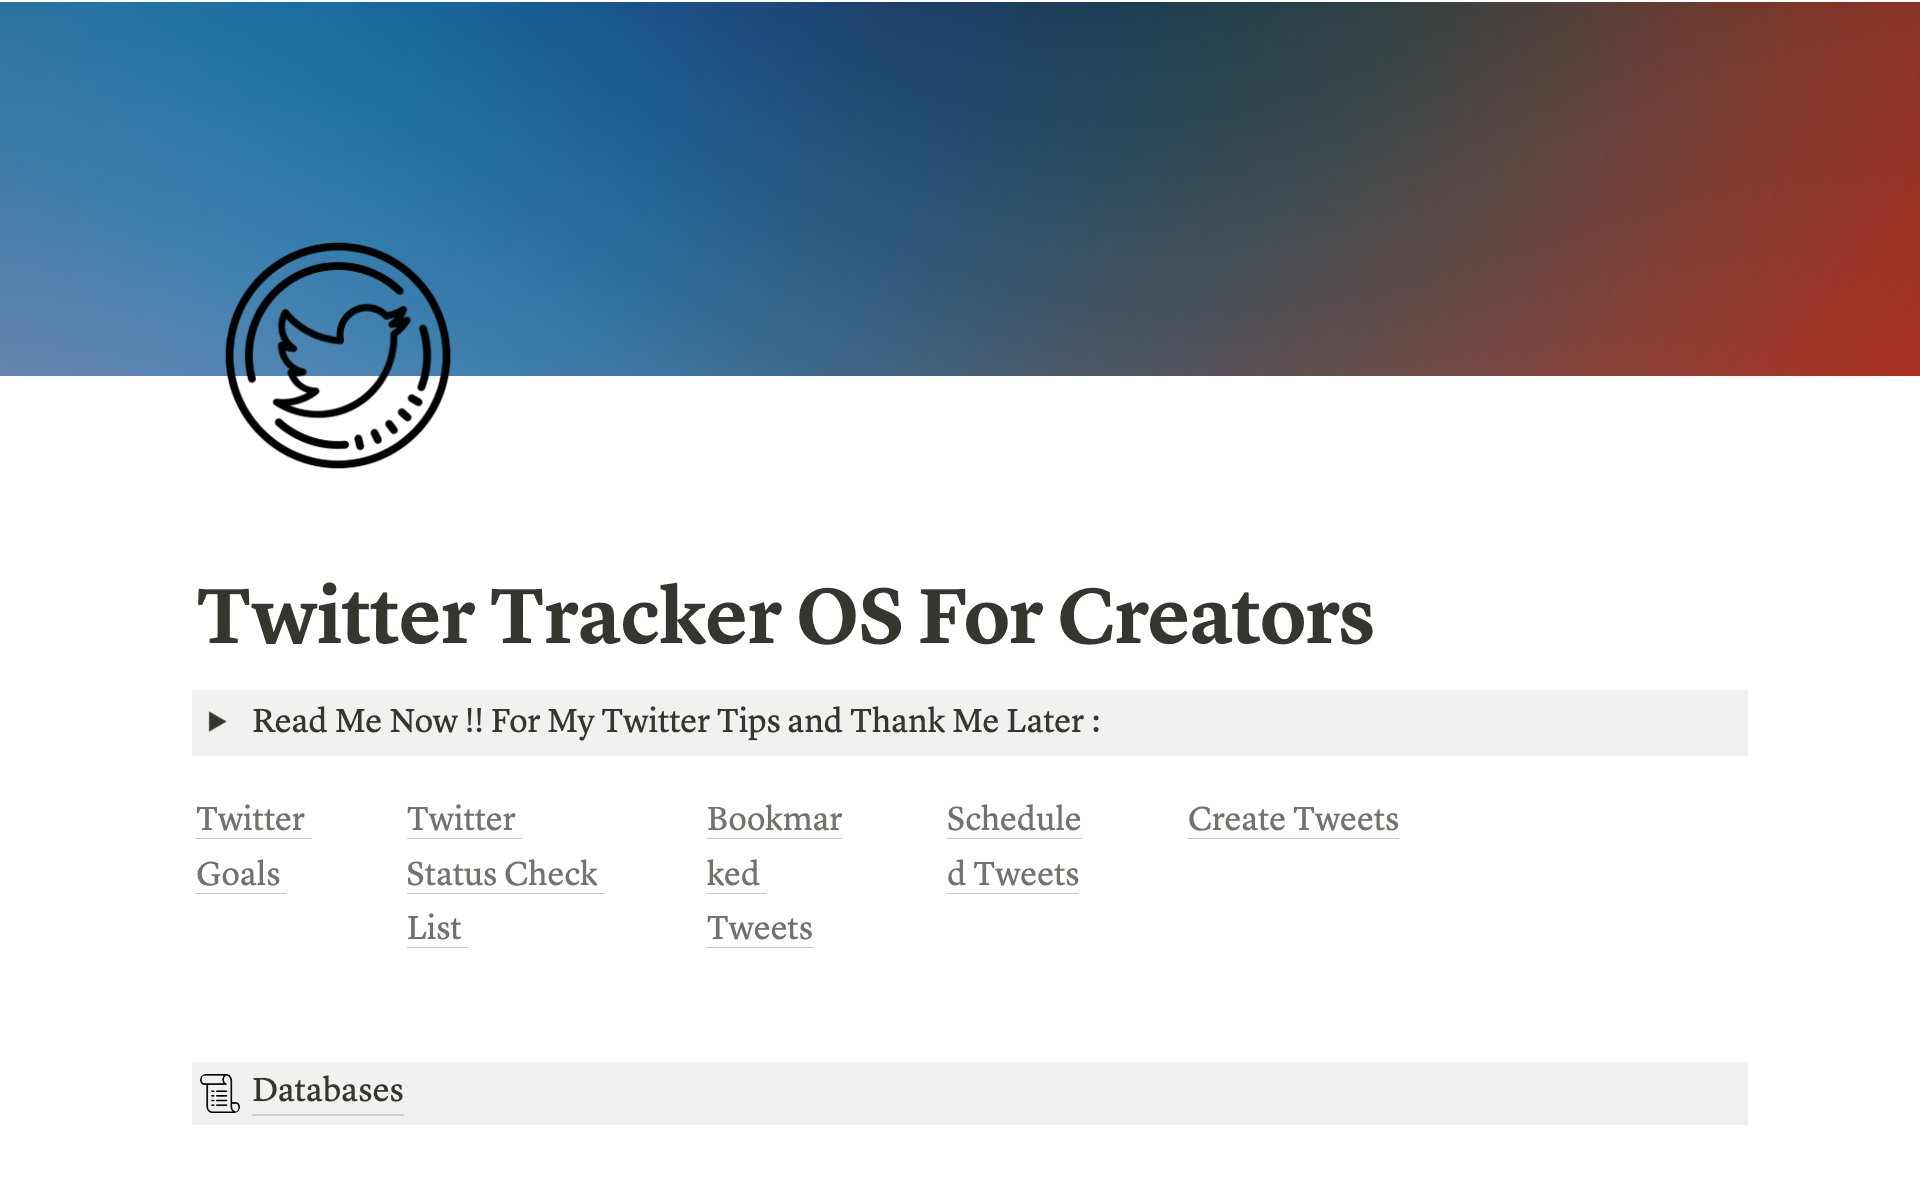 A template preview for Twitter OS For Creators